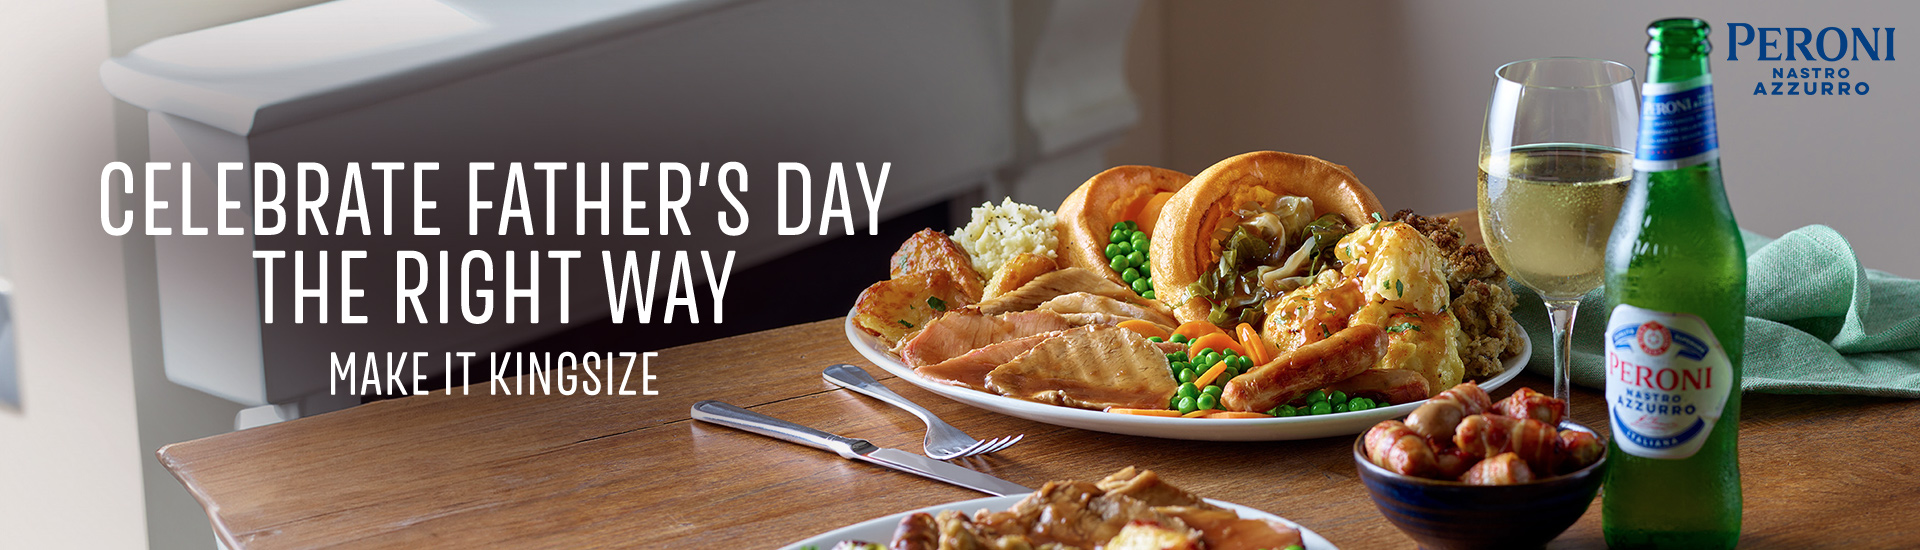 Father’s day carvery in Sutton Coldfield